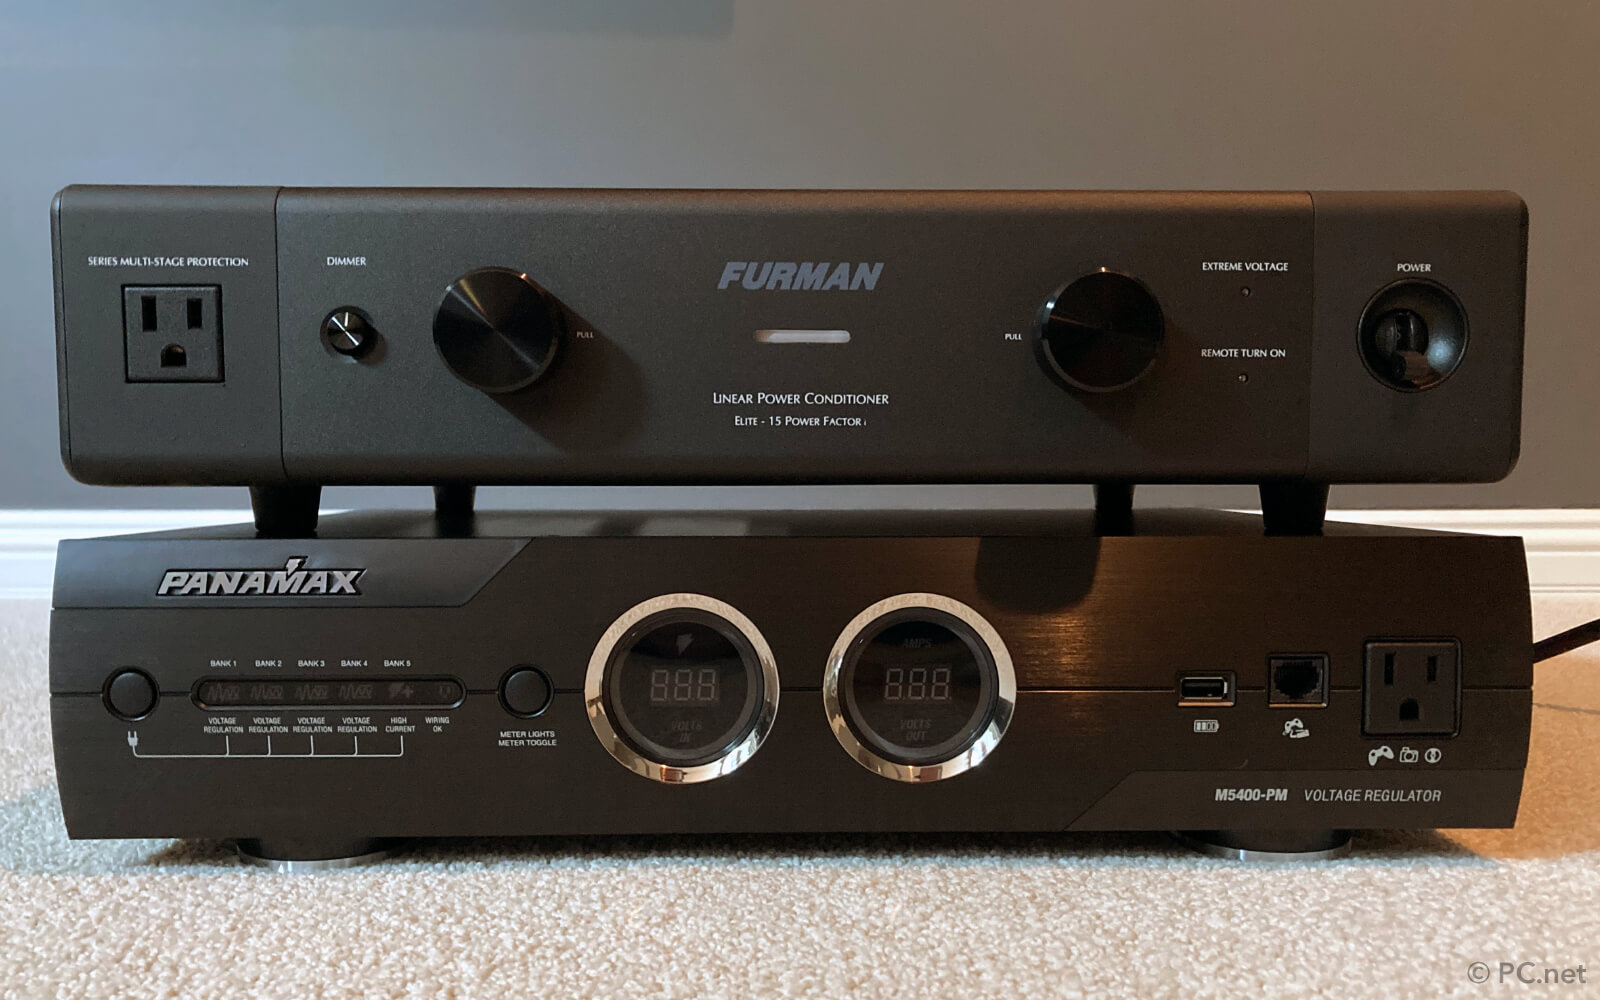 Furman Elite-15 PF and Panamax M5400-PM power conditioners